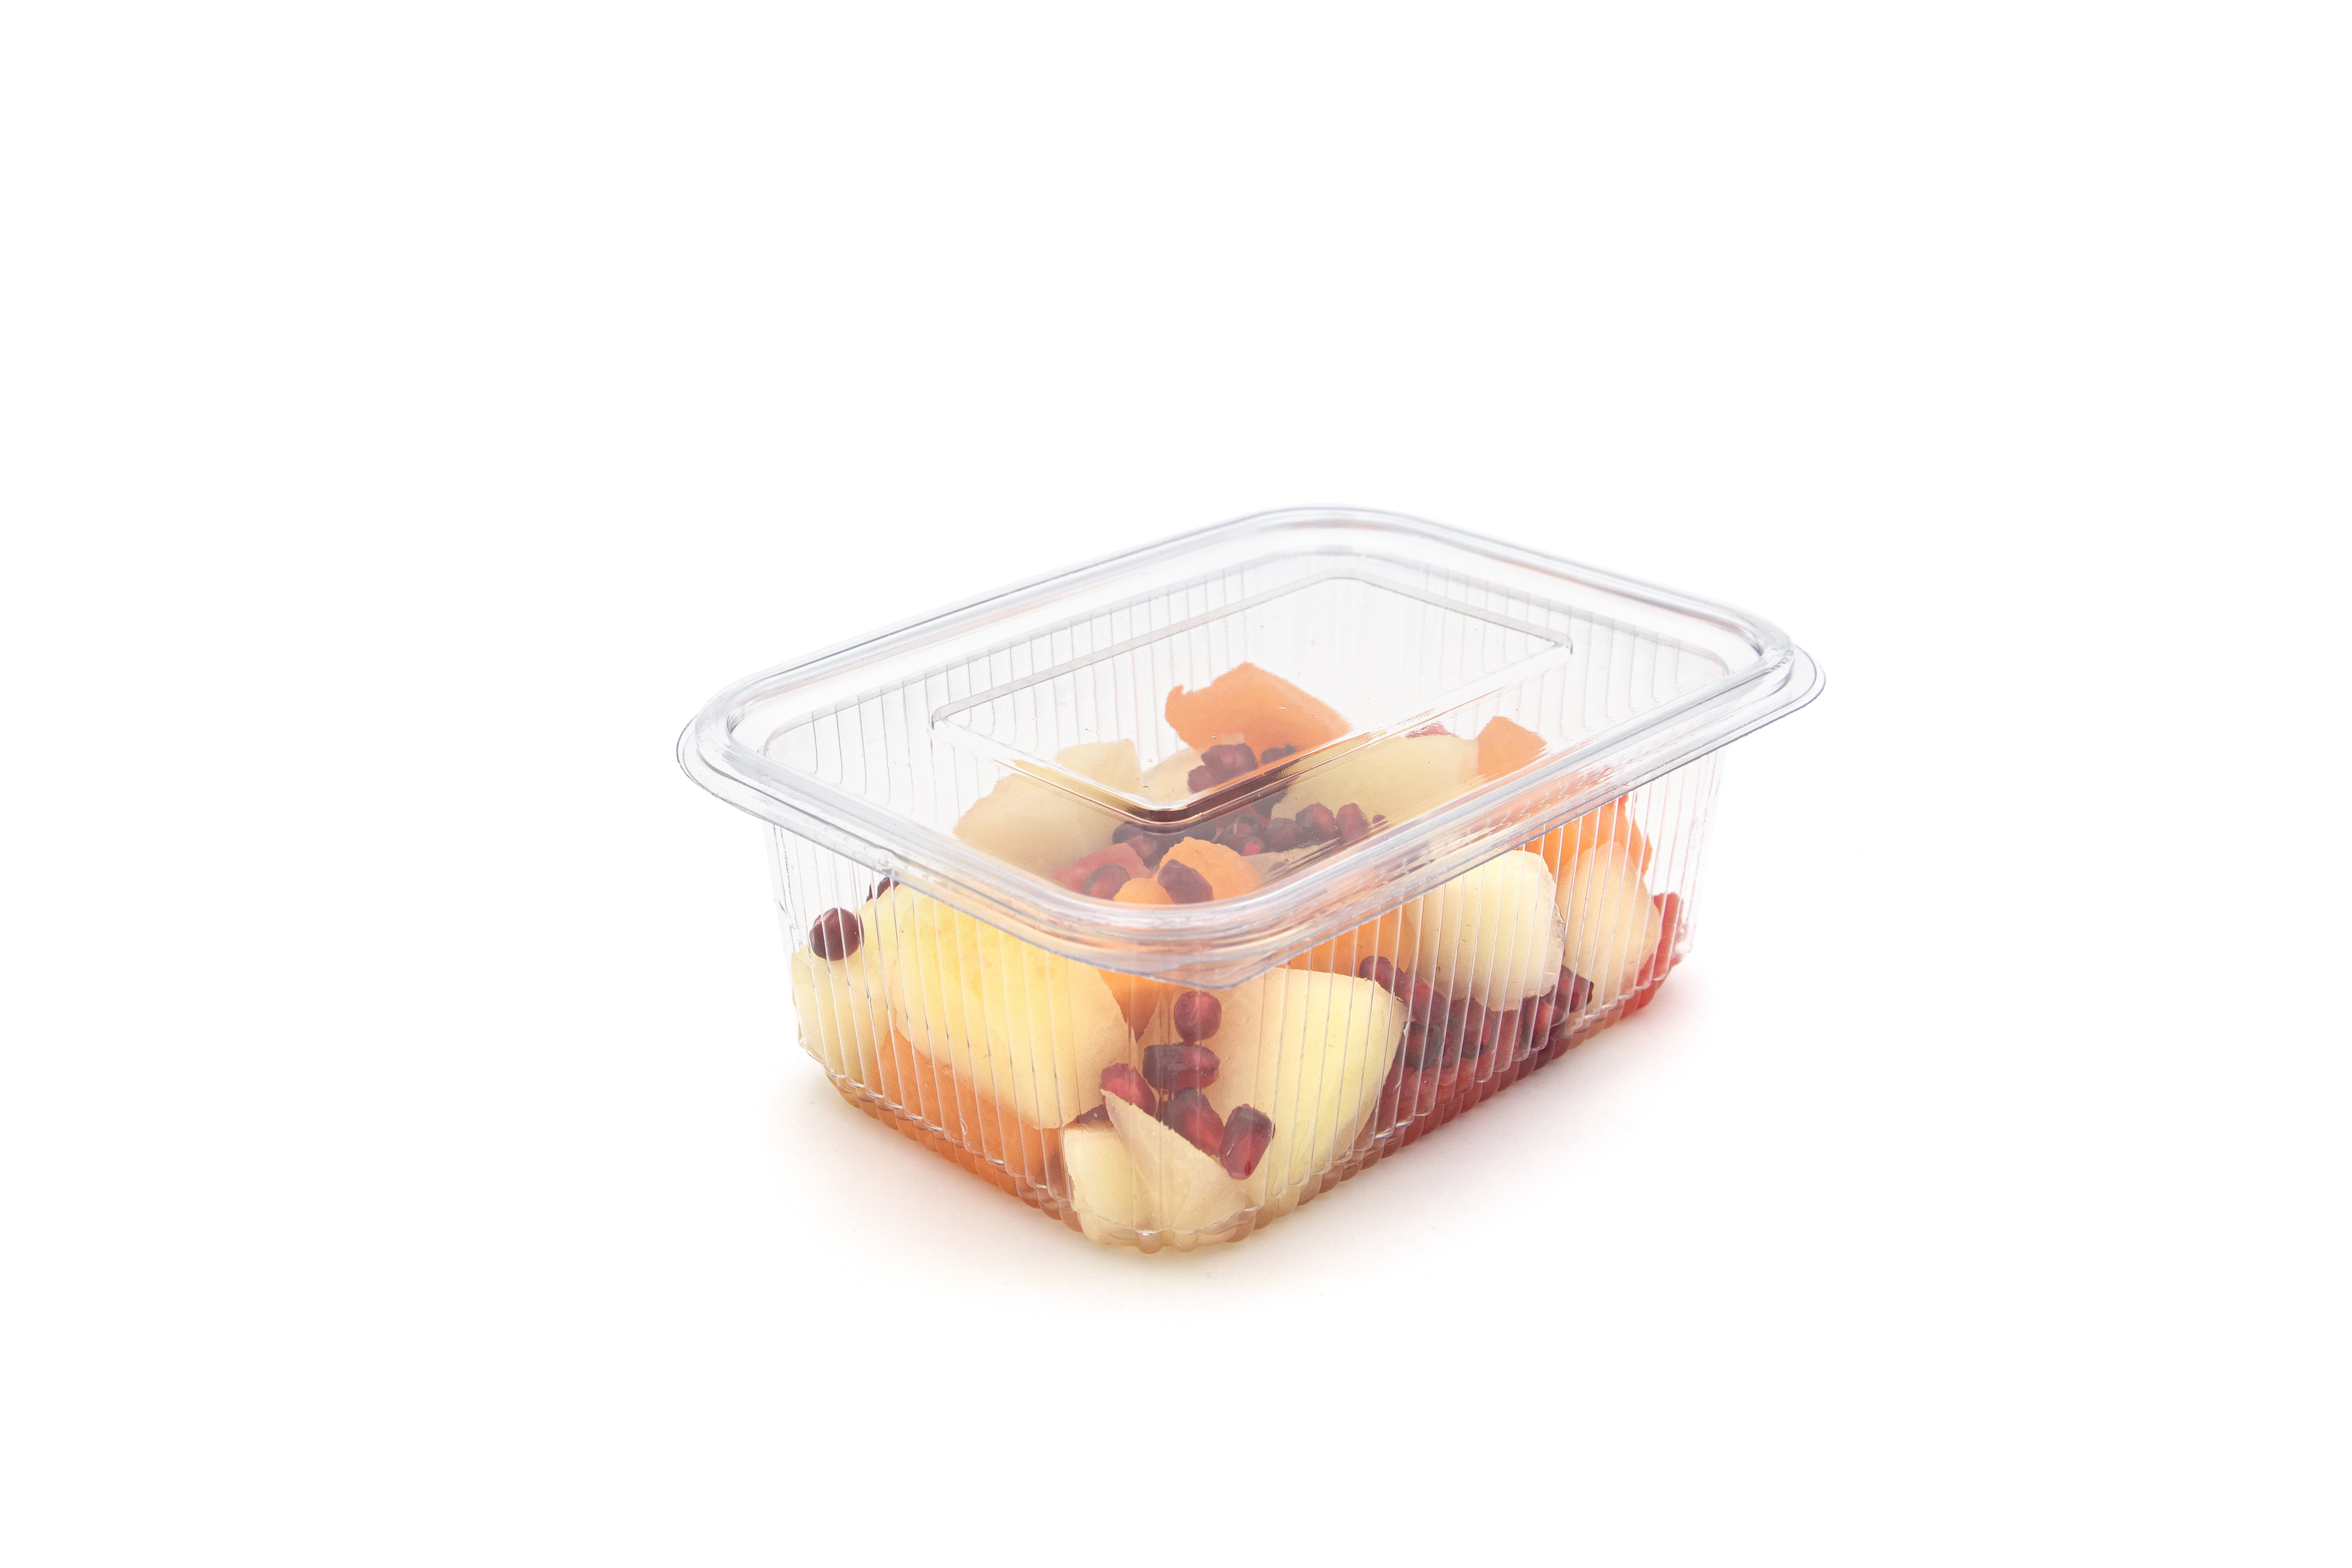 https://greenpak.supplies/wp-content/uploads/2021/06/1000ml-Rectangle-Hinged-Salad-Container-closed.jpg.jpg